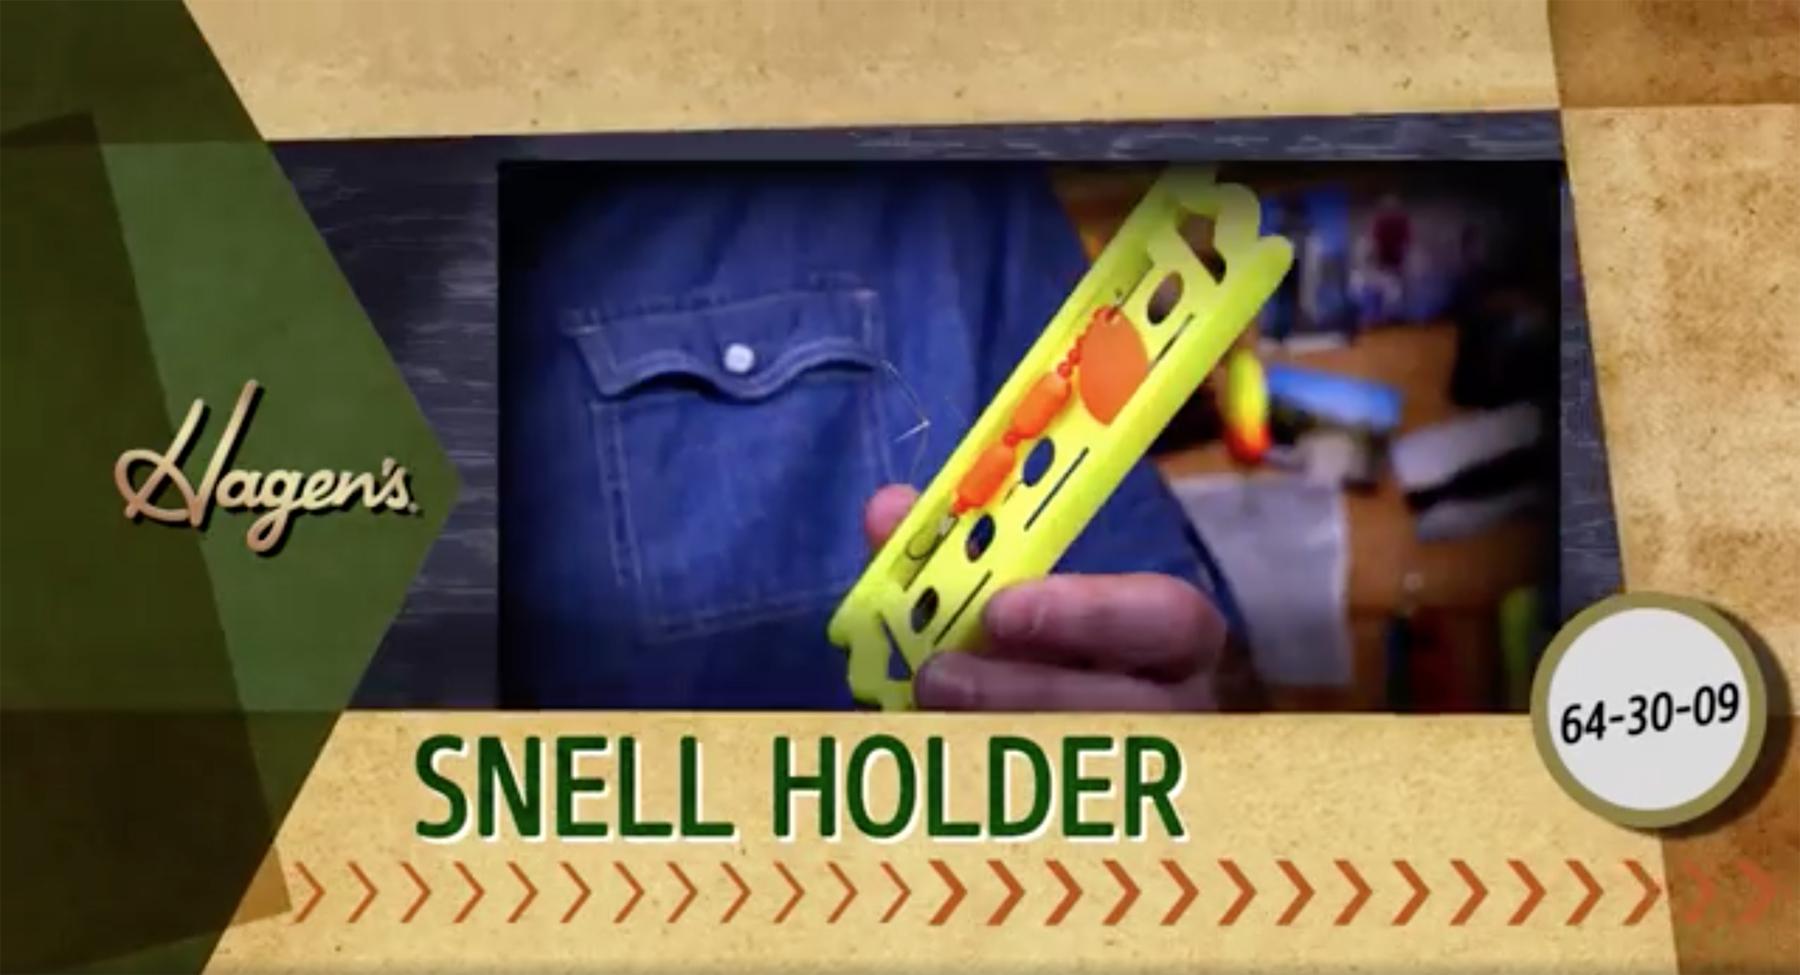 How to use Hagen's Snell Holder - Hagen's Fishing Components